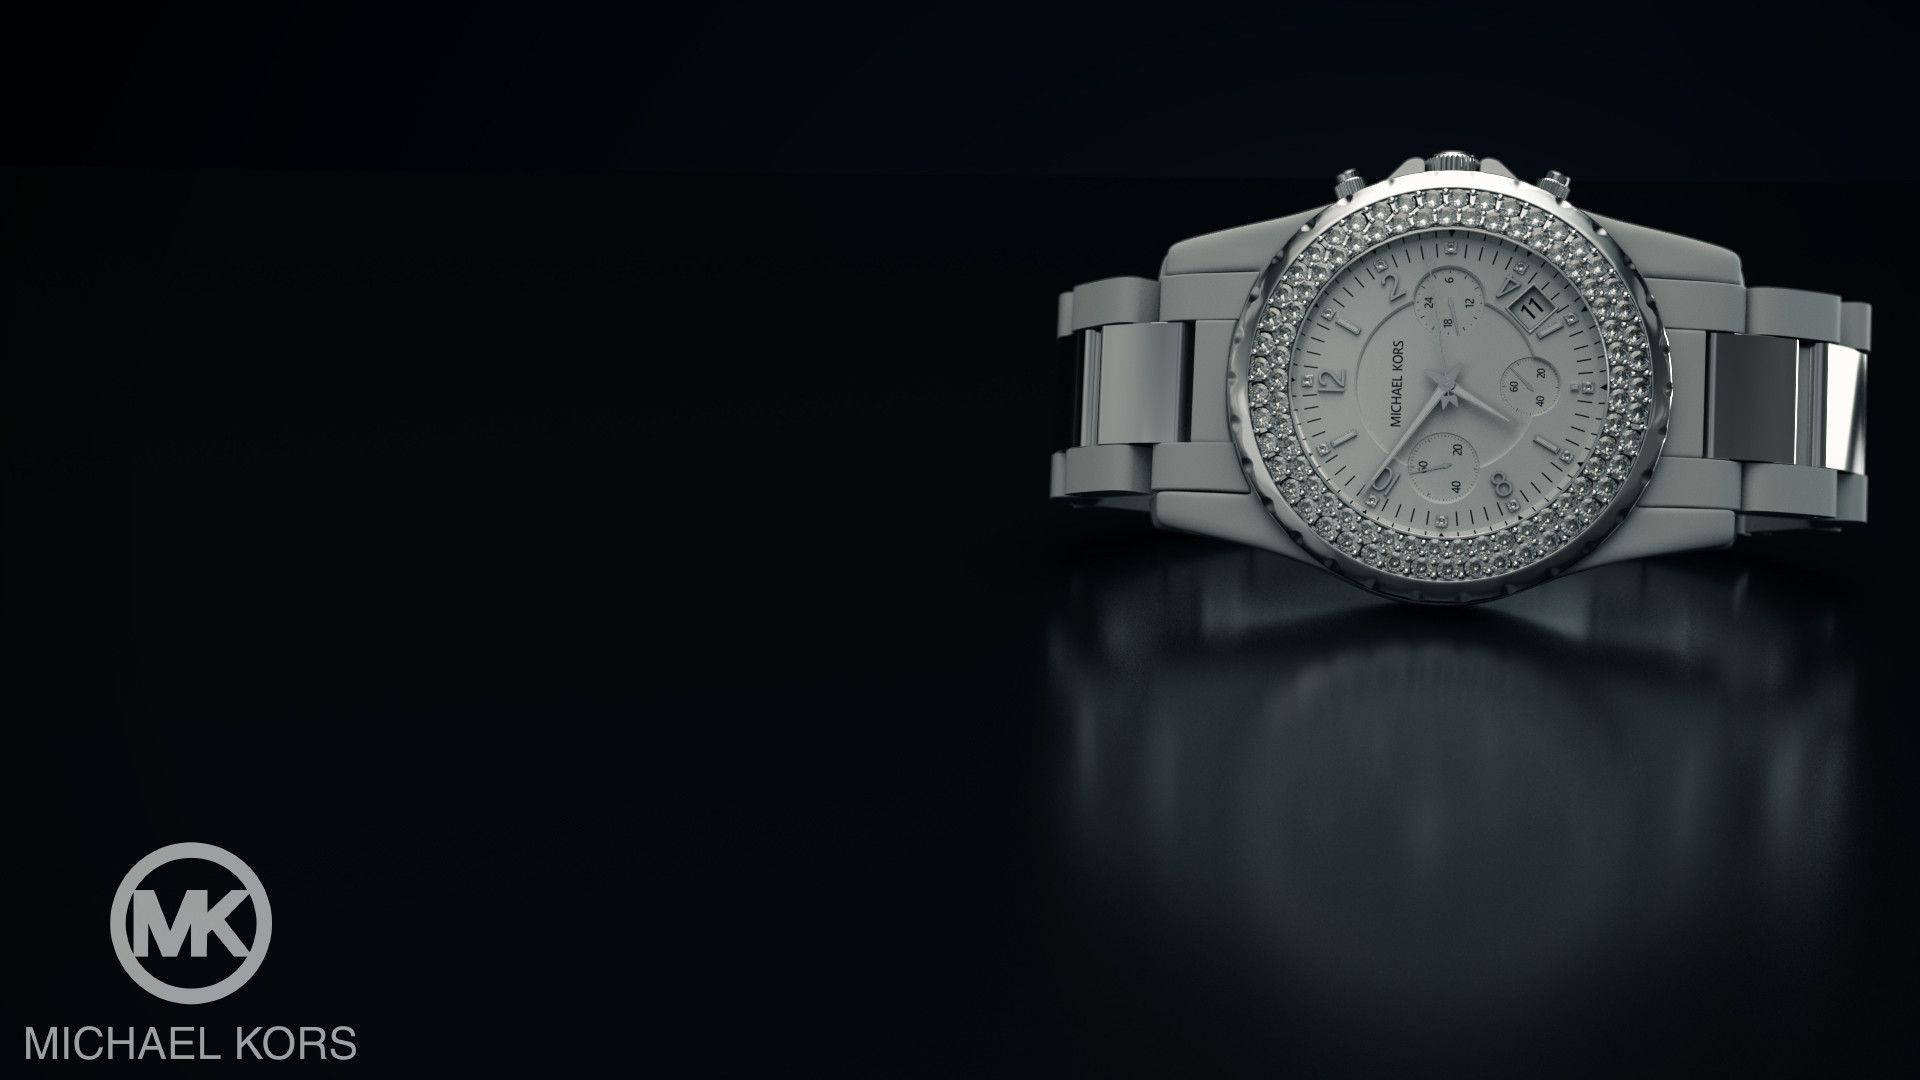 1920X1080 Michael Kors Wallpaper and Background